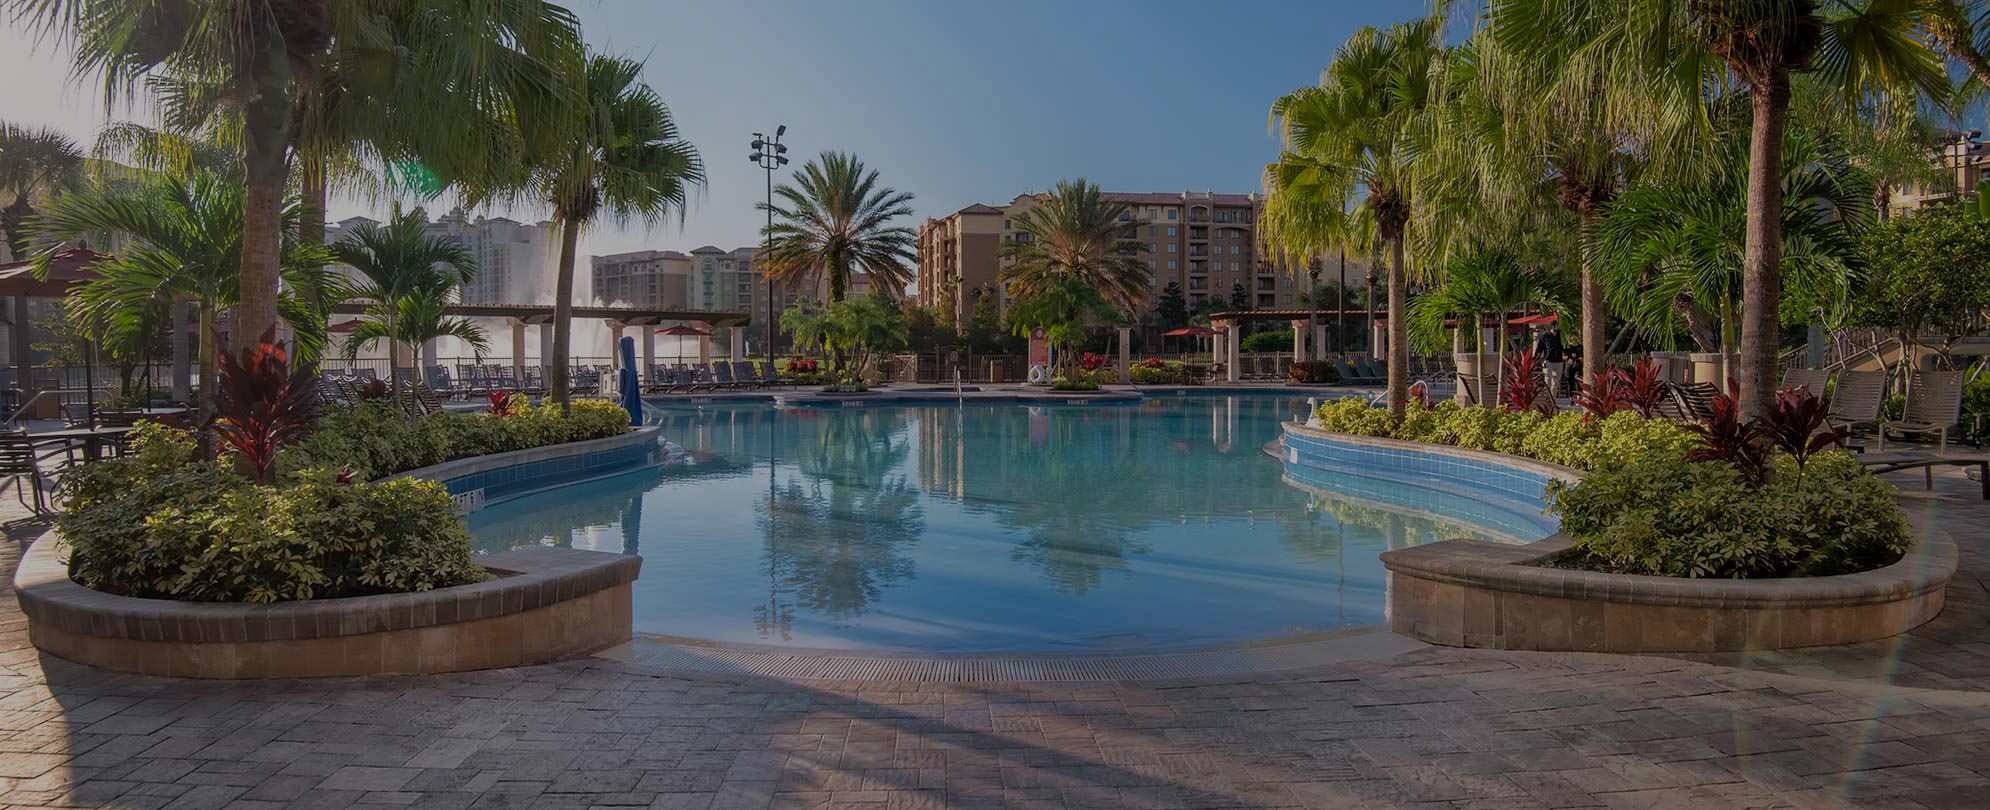 The pool surrounded by palm trees at Club Wyndham Bonnet Creek, a timeshare resort in Orlando, Florida.